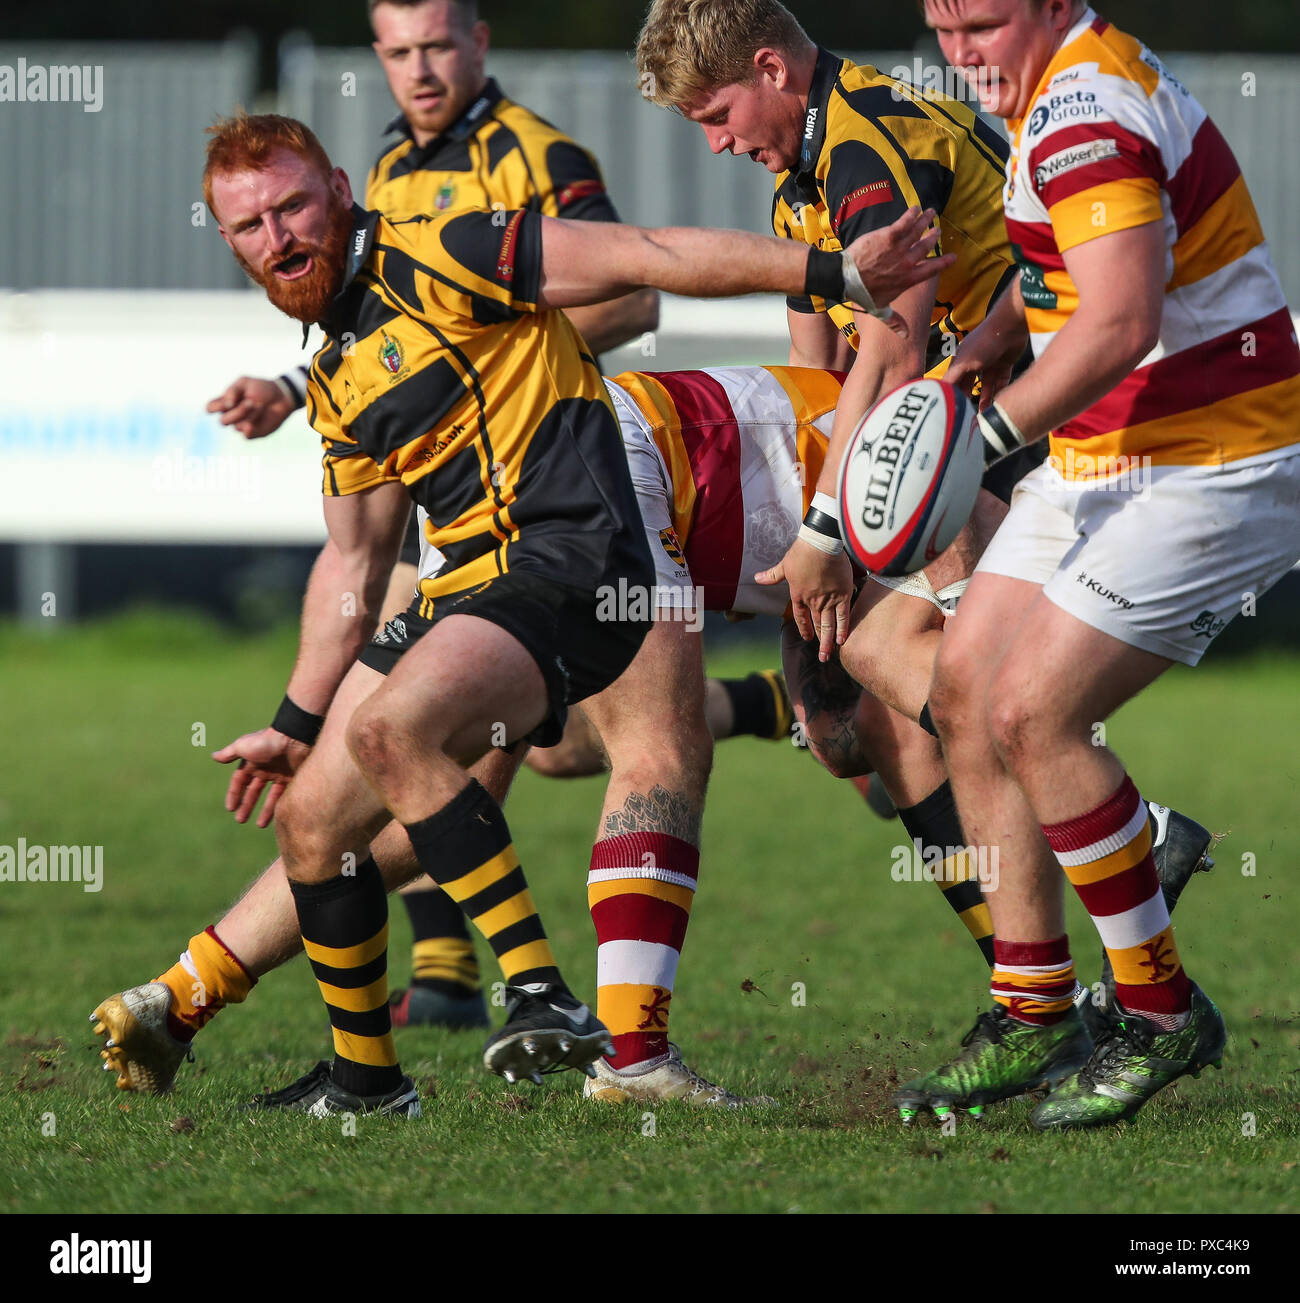 20.10.2018 Hinckley, Leicester, England. Rugby Union, Hinckley rfc v Fylde rfc.   Jamie Skerritt in action for Hinckley during the RFU National League 2 North (NL2N) game played at the Leicester  Road Stadium.    © Phil Hutchinson / Alamy Live News Stock Photo